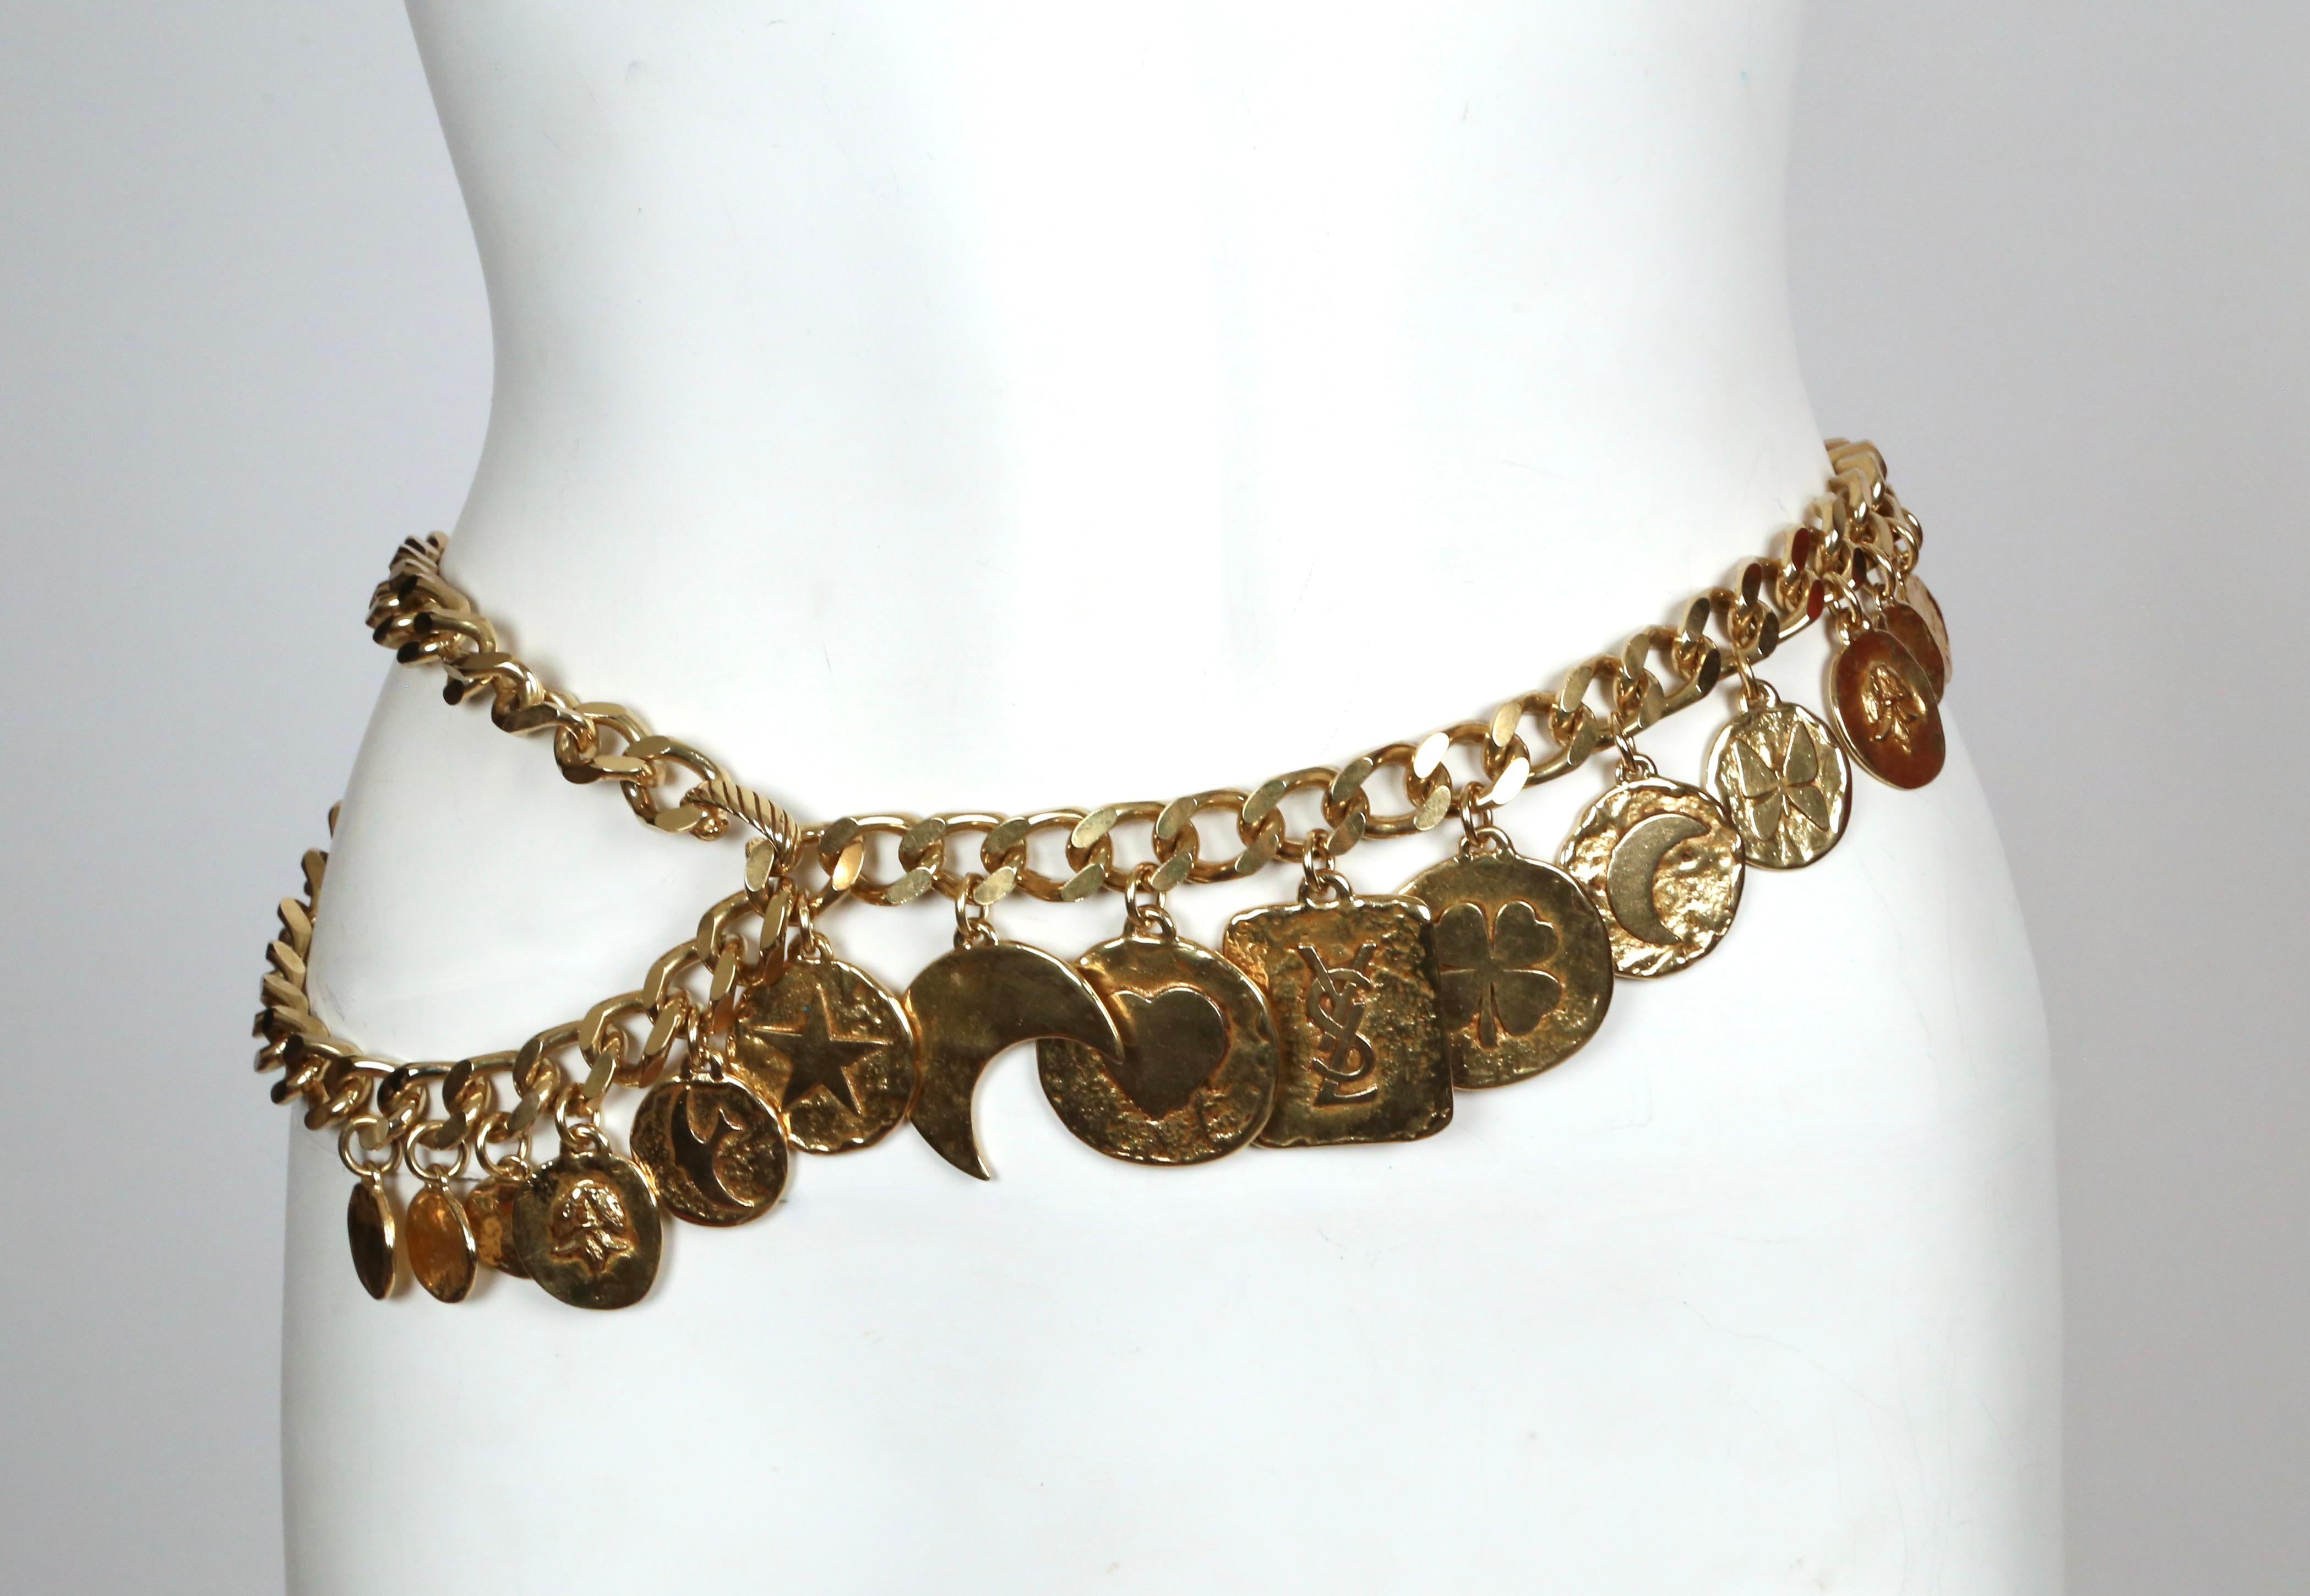 Very rare gilt charm belt designed by Yves Saint Laurent dating to the early 1990's. This fabulous belt features 16 coin charms suspended from a 37